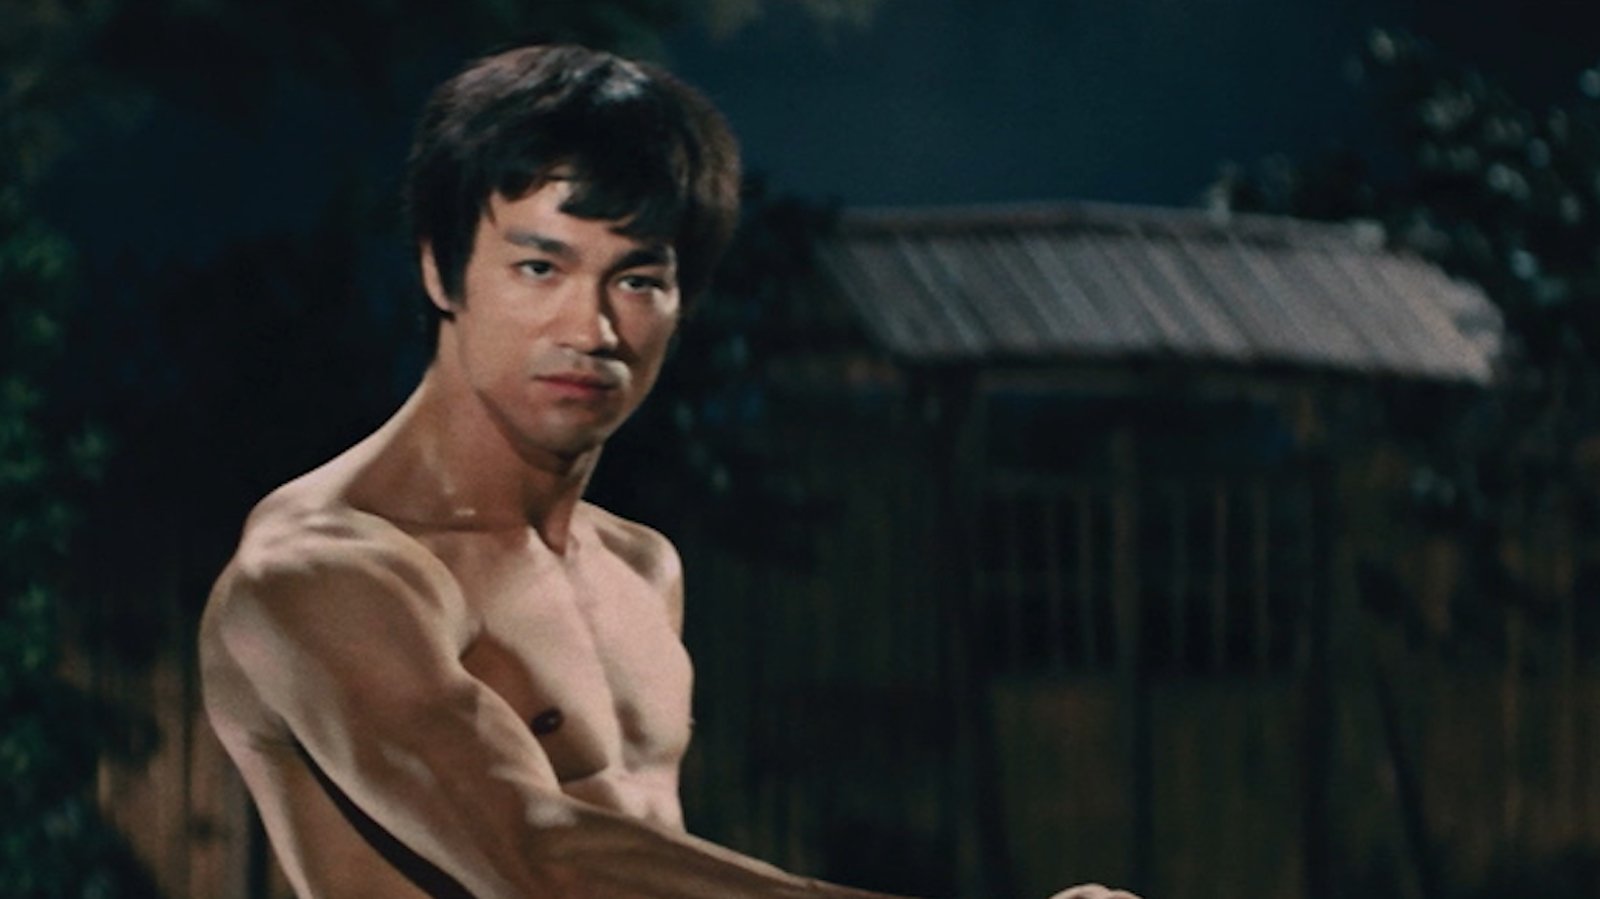 Bruce Lee, standing in a martial arts pose, shirtless